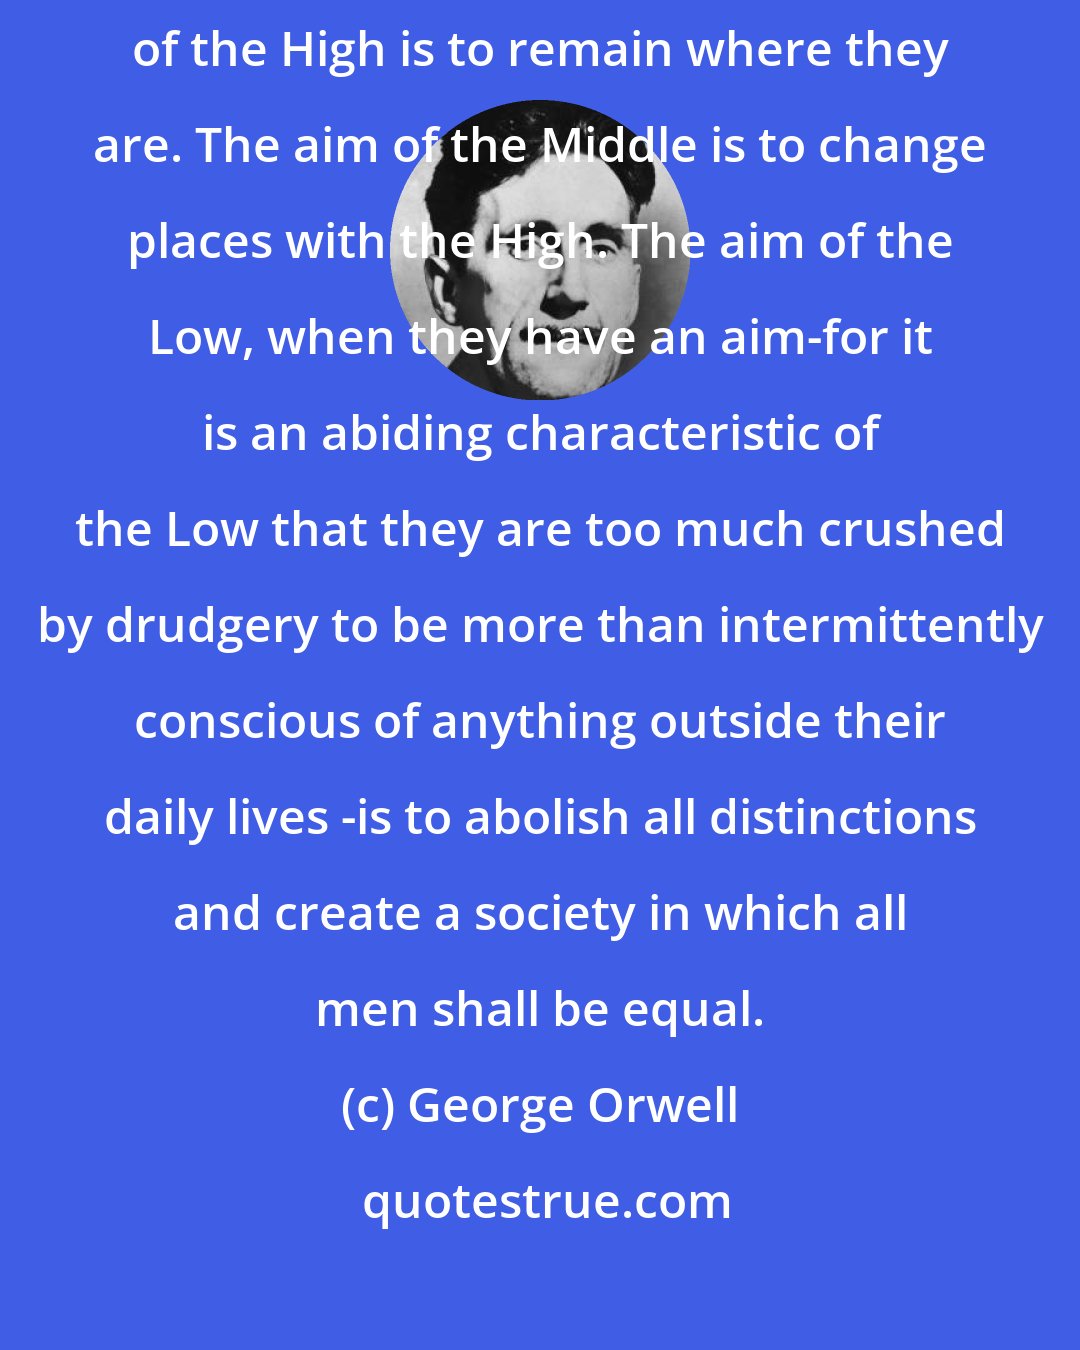 George Orwell: The aims of these three groups are entirely irreconcilable. The aim of the High is to remain where they are. The aim of the Middle is to change places with the High. The aim of the Low, when they have an aim-for it is an abiding characteristic of the Low that they are too much crushed by drudgery to be more than intermittently conscious of anything outside their daily lives -is to abolish all distinctions and create a society in which all men shall be equal.